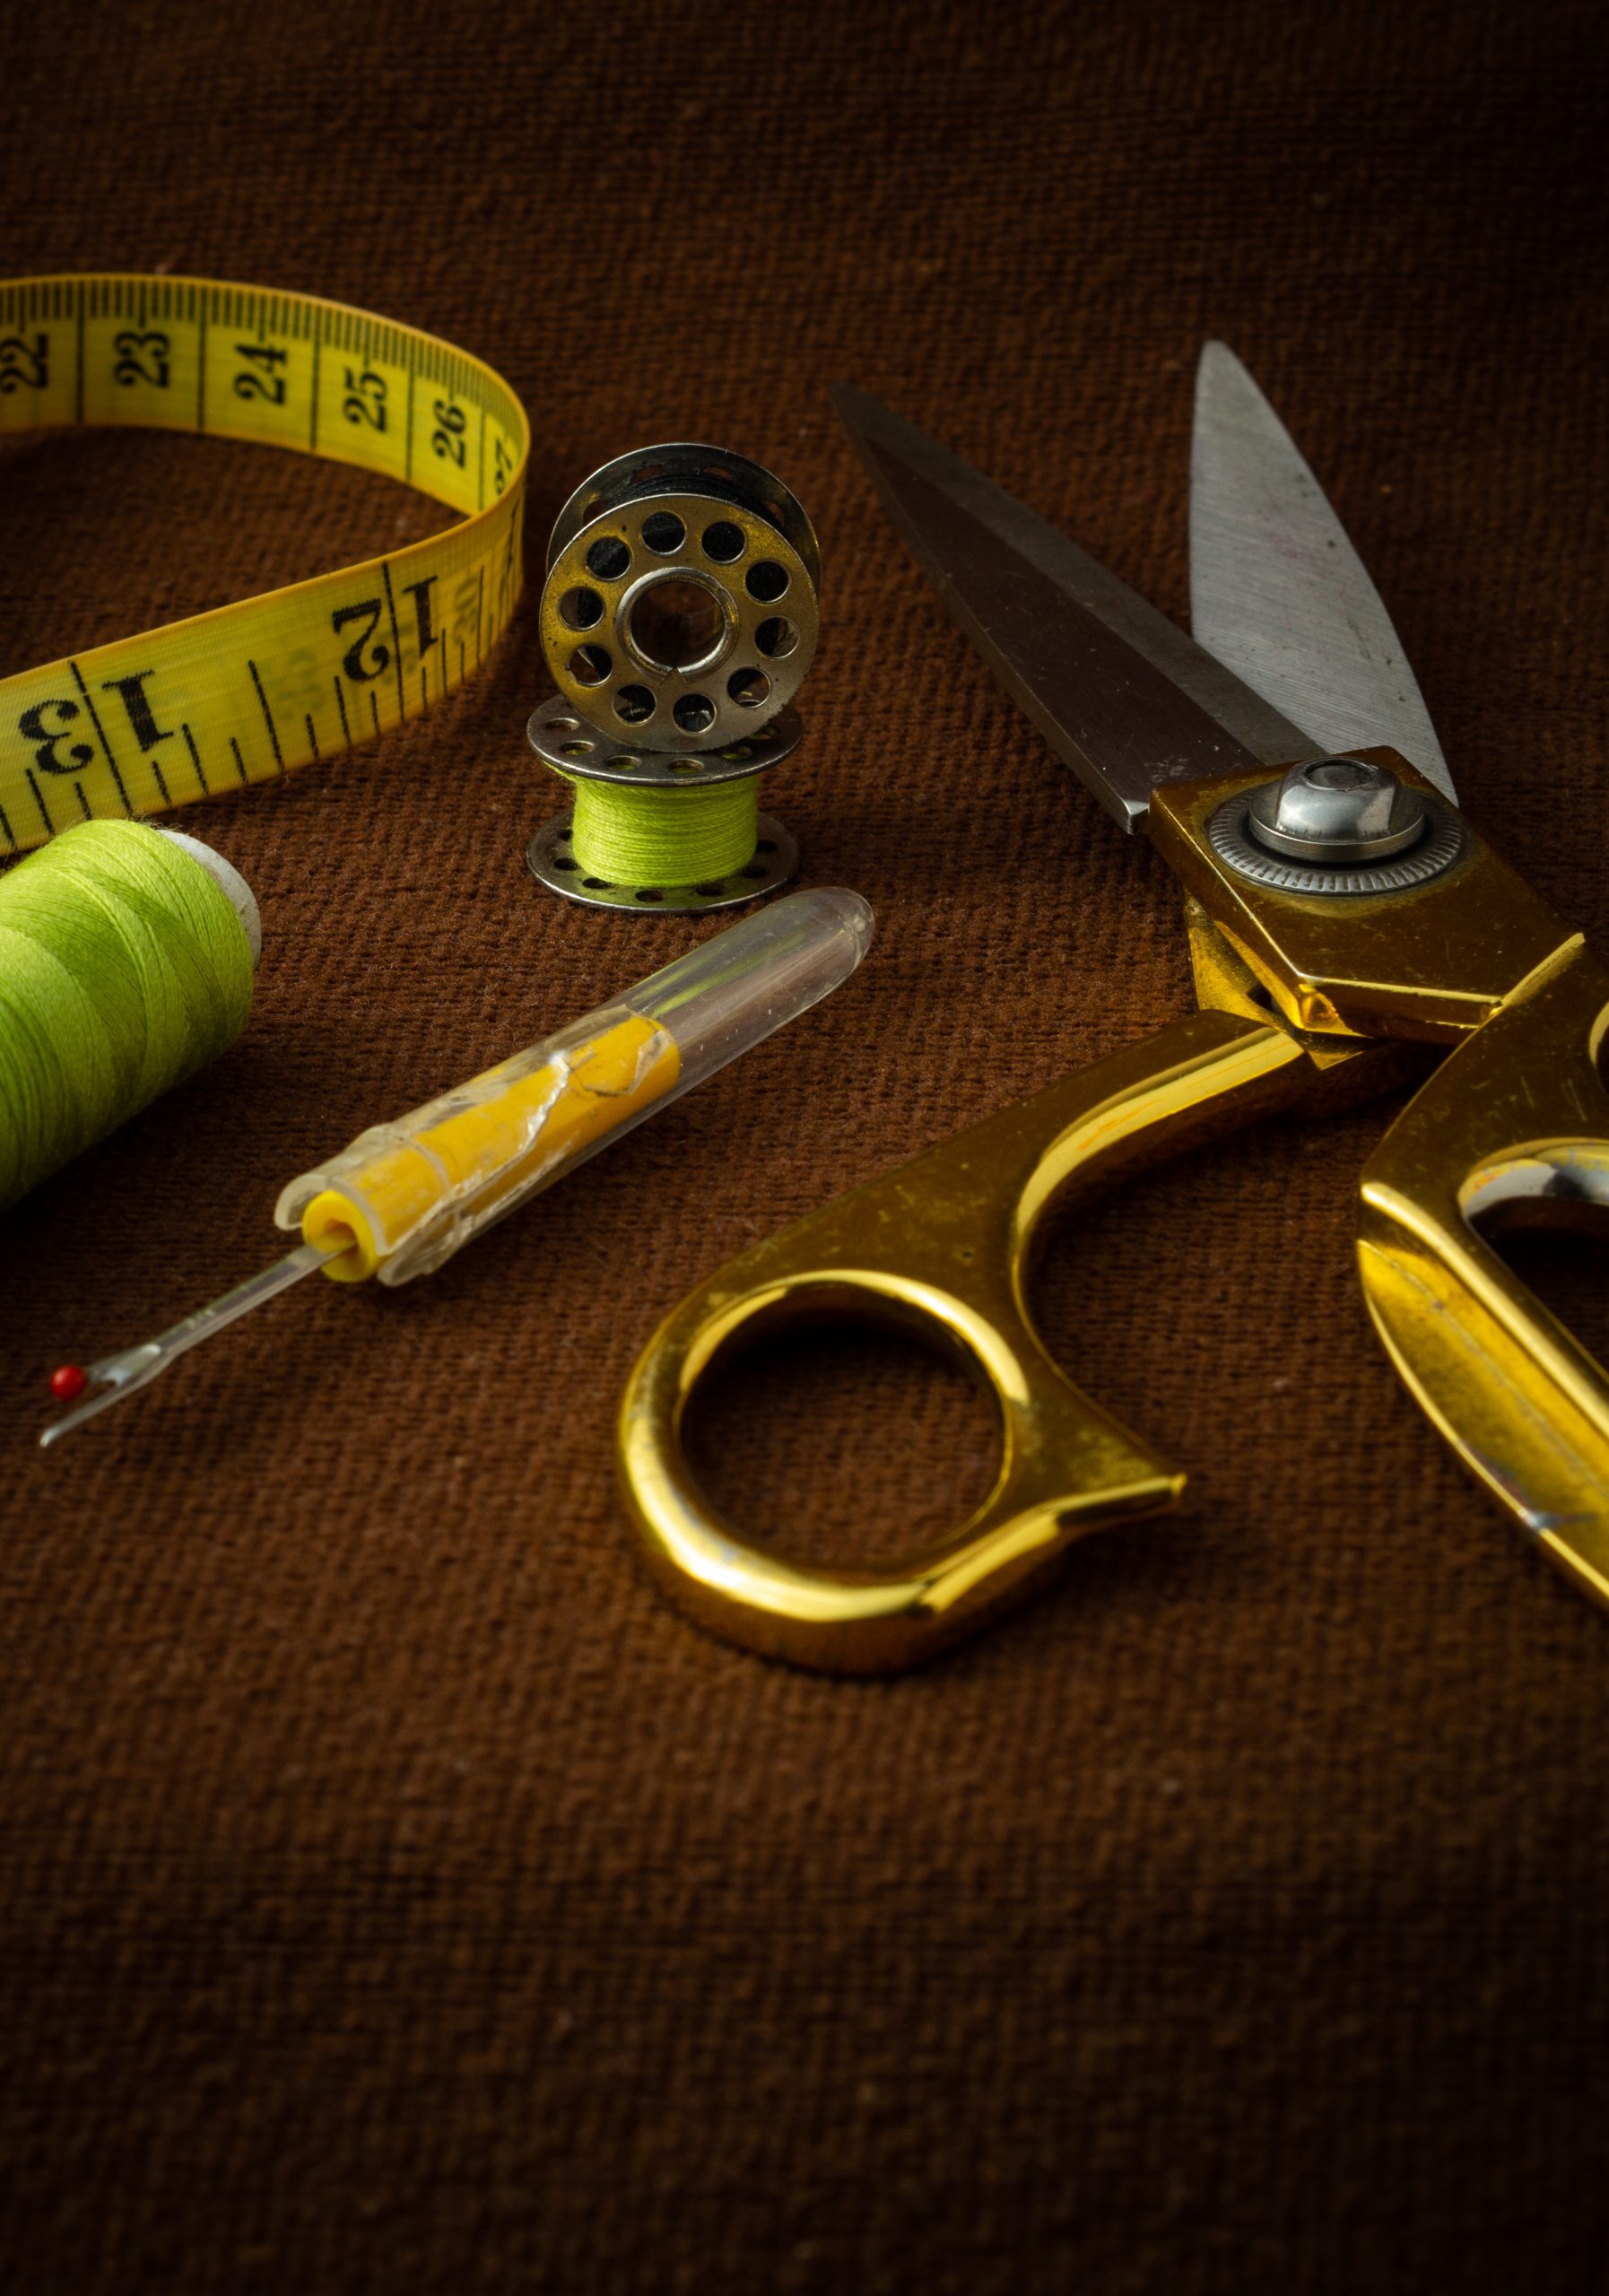 Tools used in tailoring